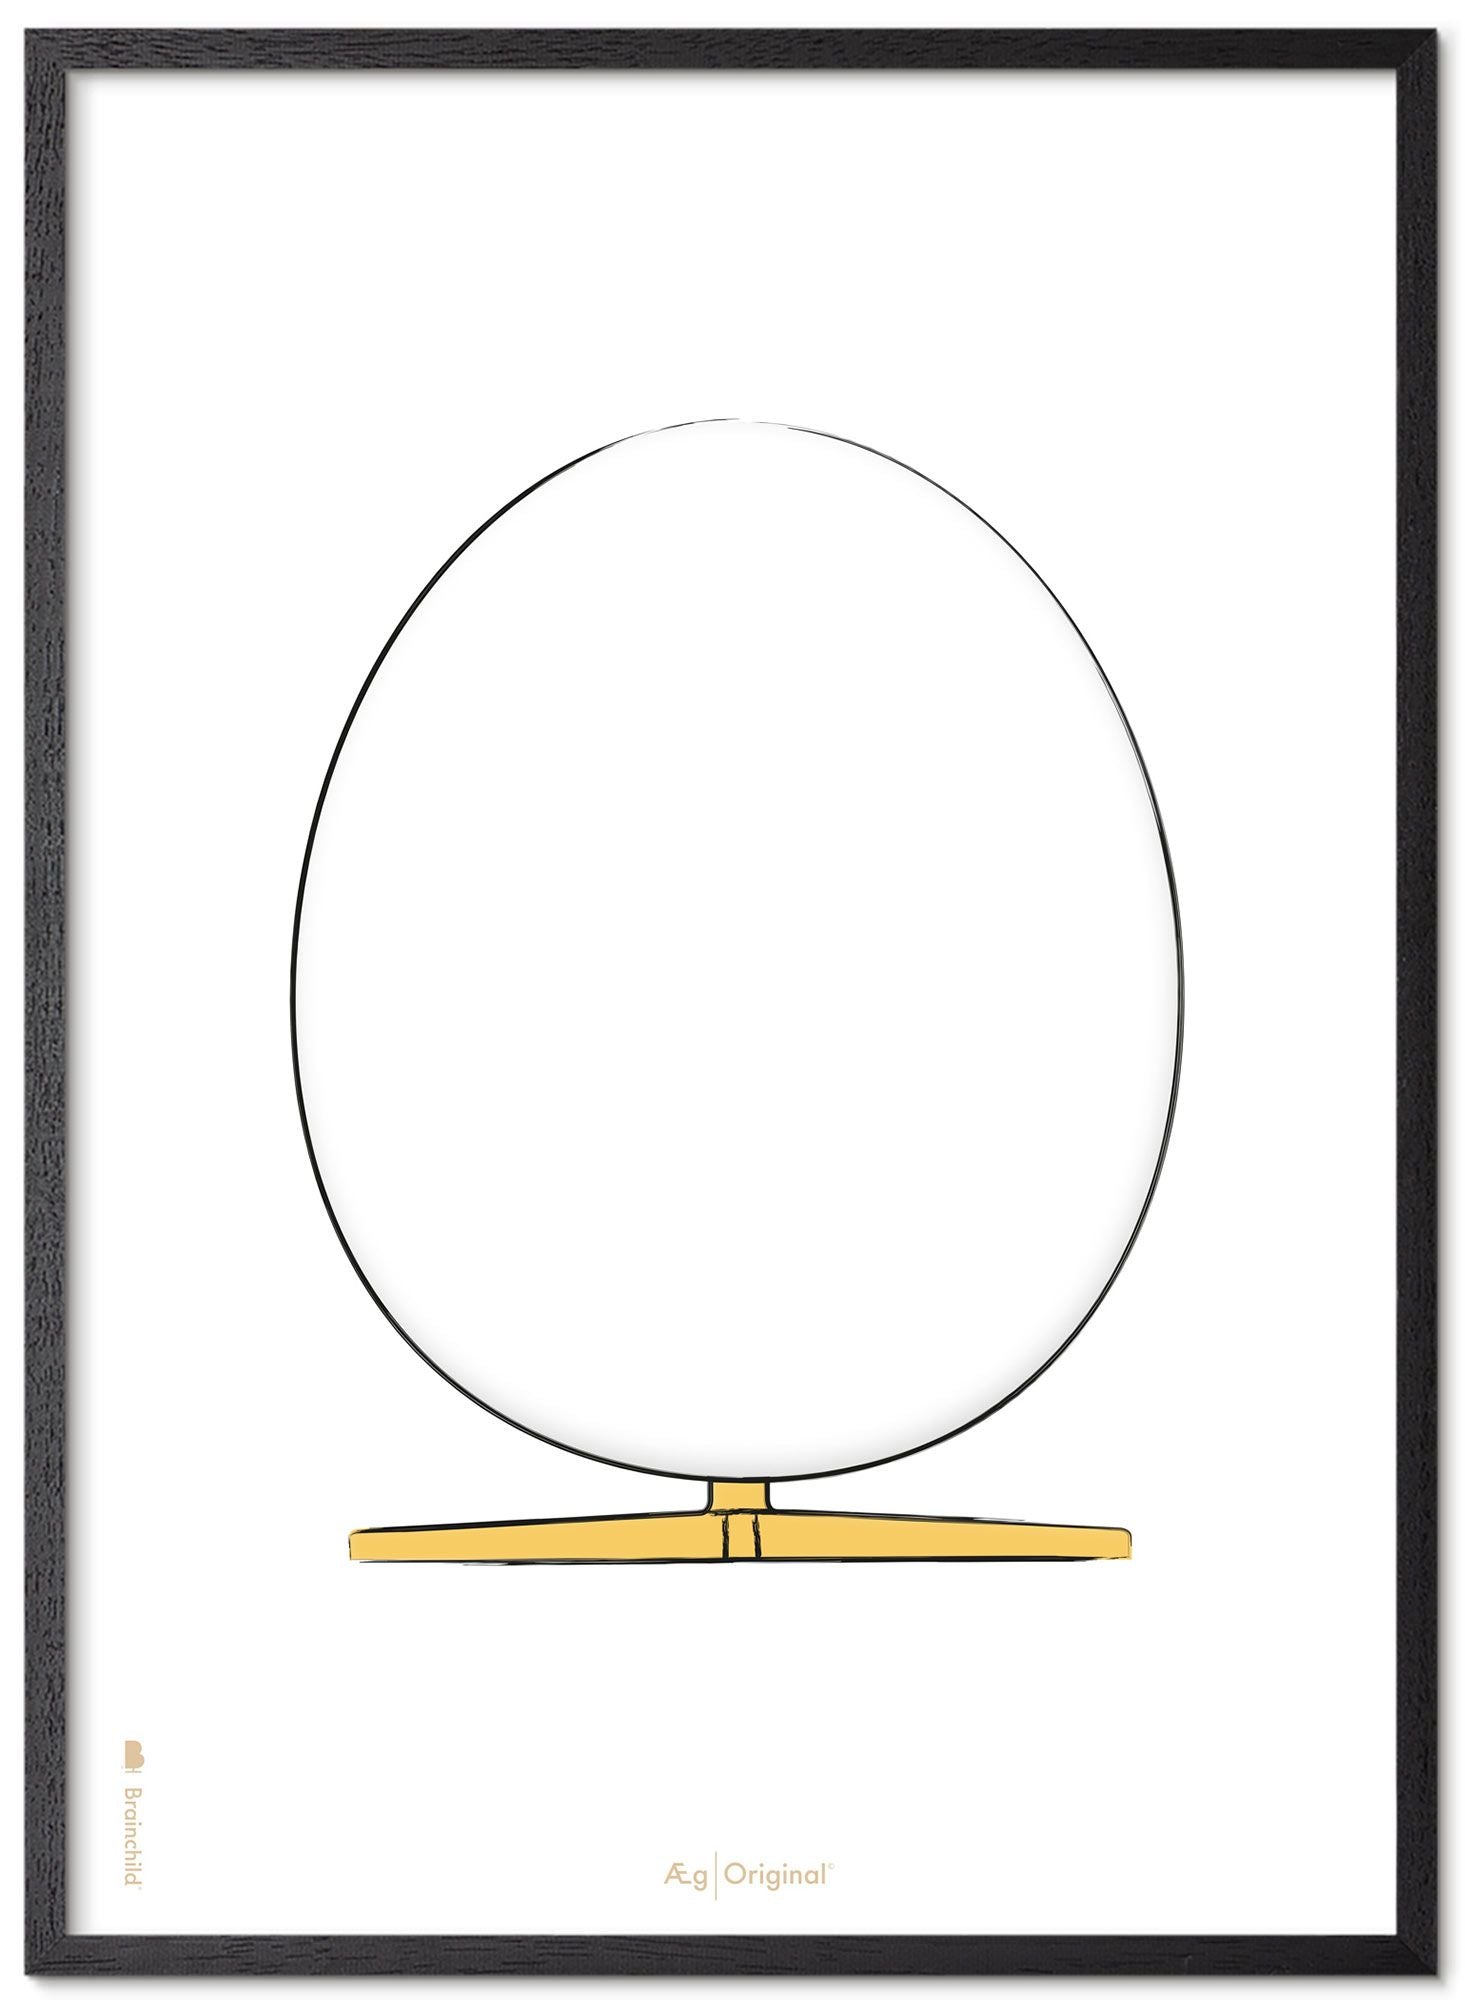 Brainchild The Egg Design Sketch Poster With Frame Made Of Black Lacquered Wood A5, White Background